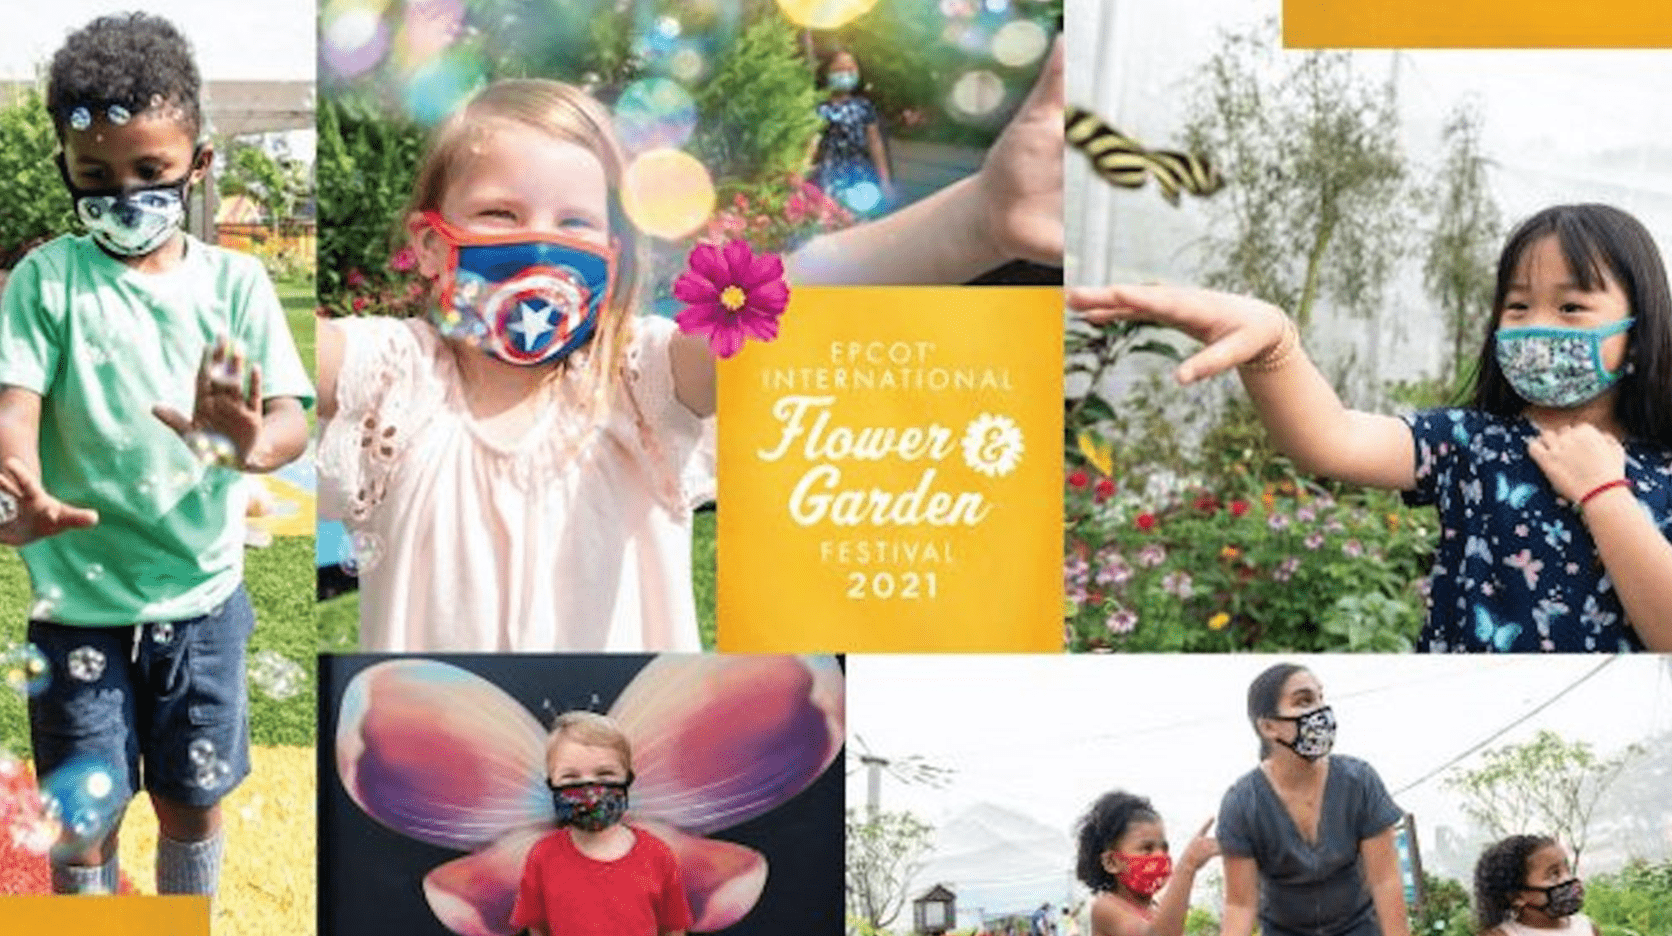 EPCOT In Full Bloom with Activities to Delight and Entertain Little Ones